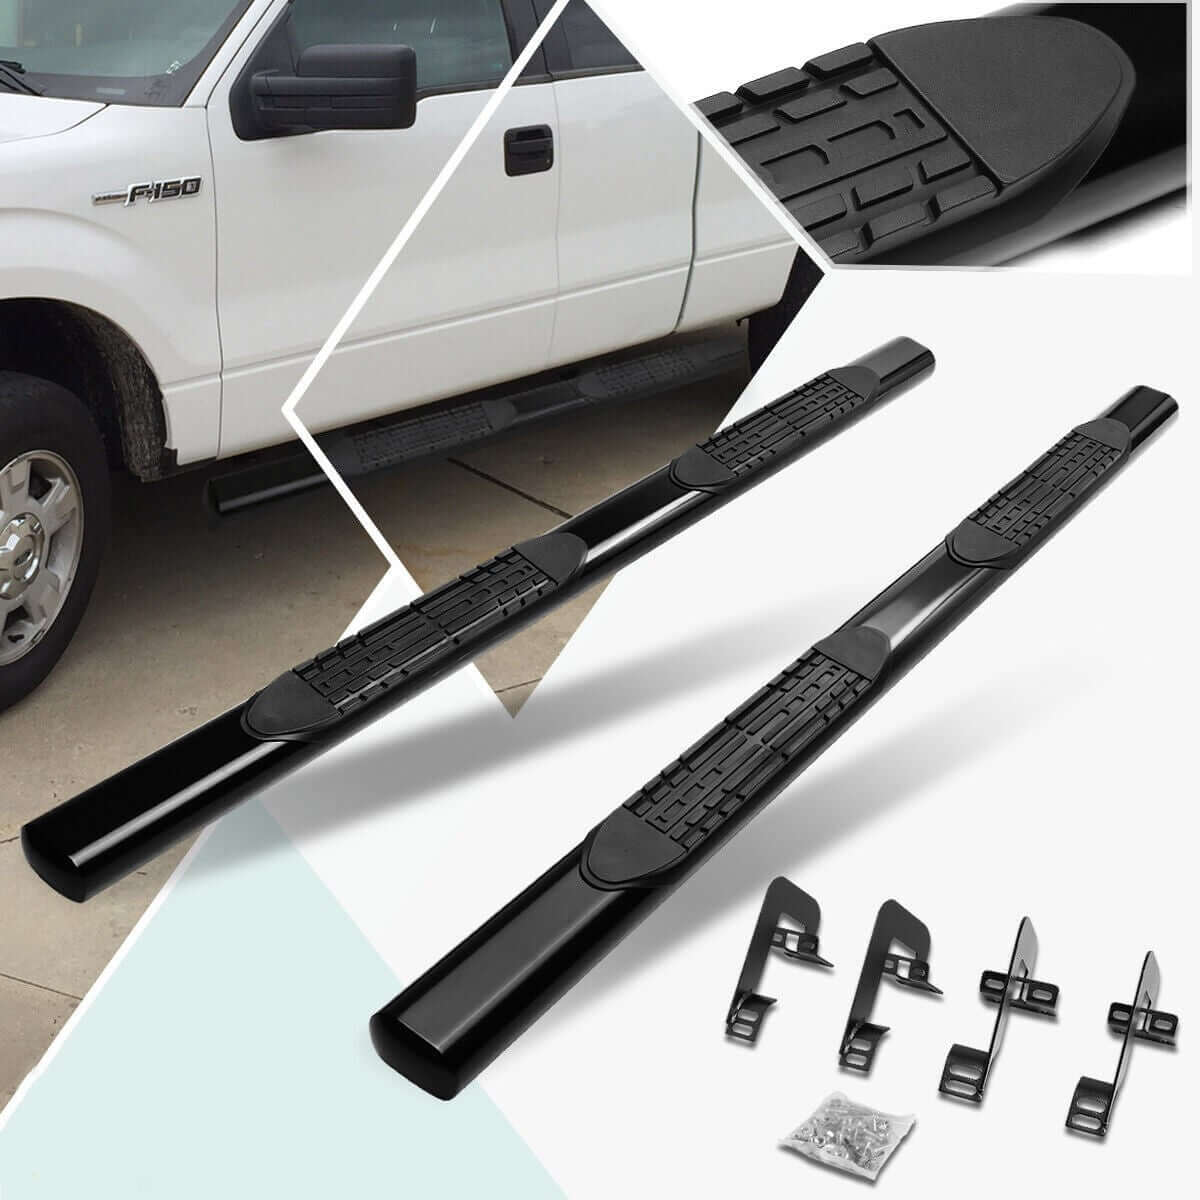 {WildWell}{Ford F150 Running Boards}-{Ford F150 Running Boards 2004-2014/1}-right